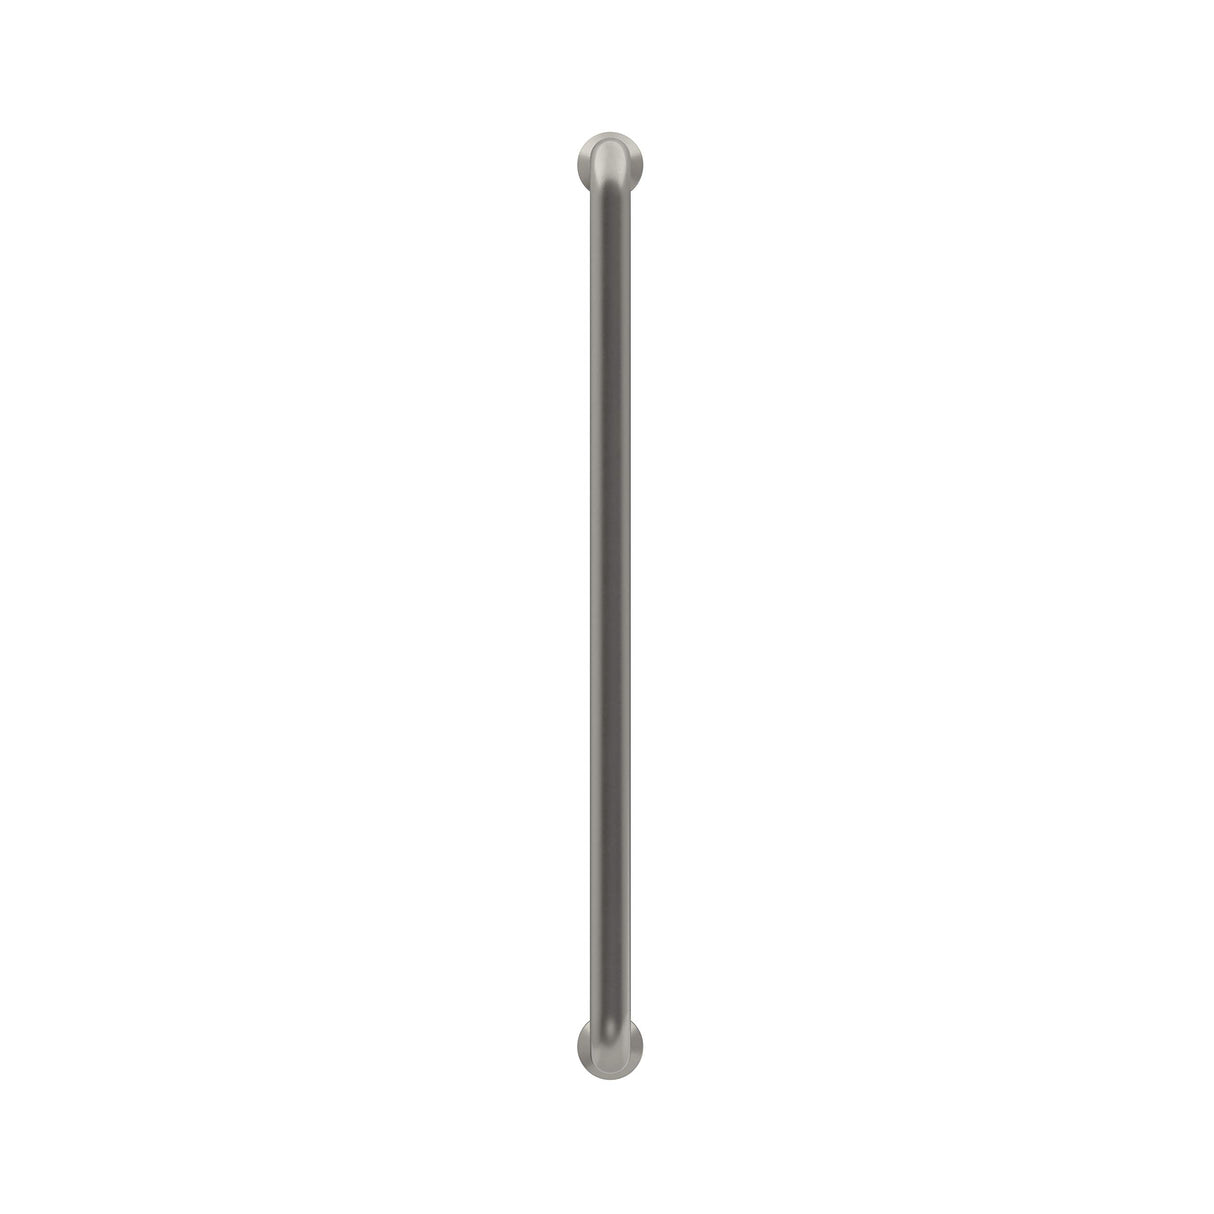 Amerock Cabinet Pull Satin Nickel 7-9/16 inch (192 mm) Center-to-Center Factor 1 Pack Drawer Pull Cabinet Handle Cabinet Hardware